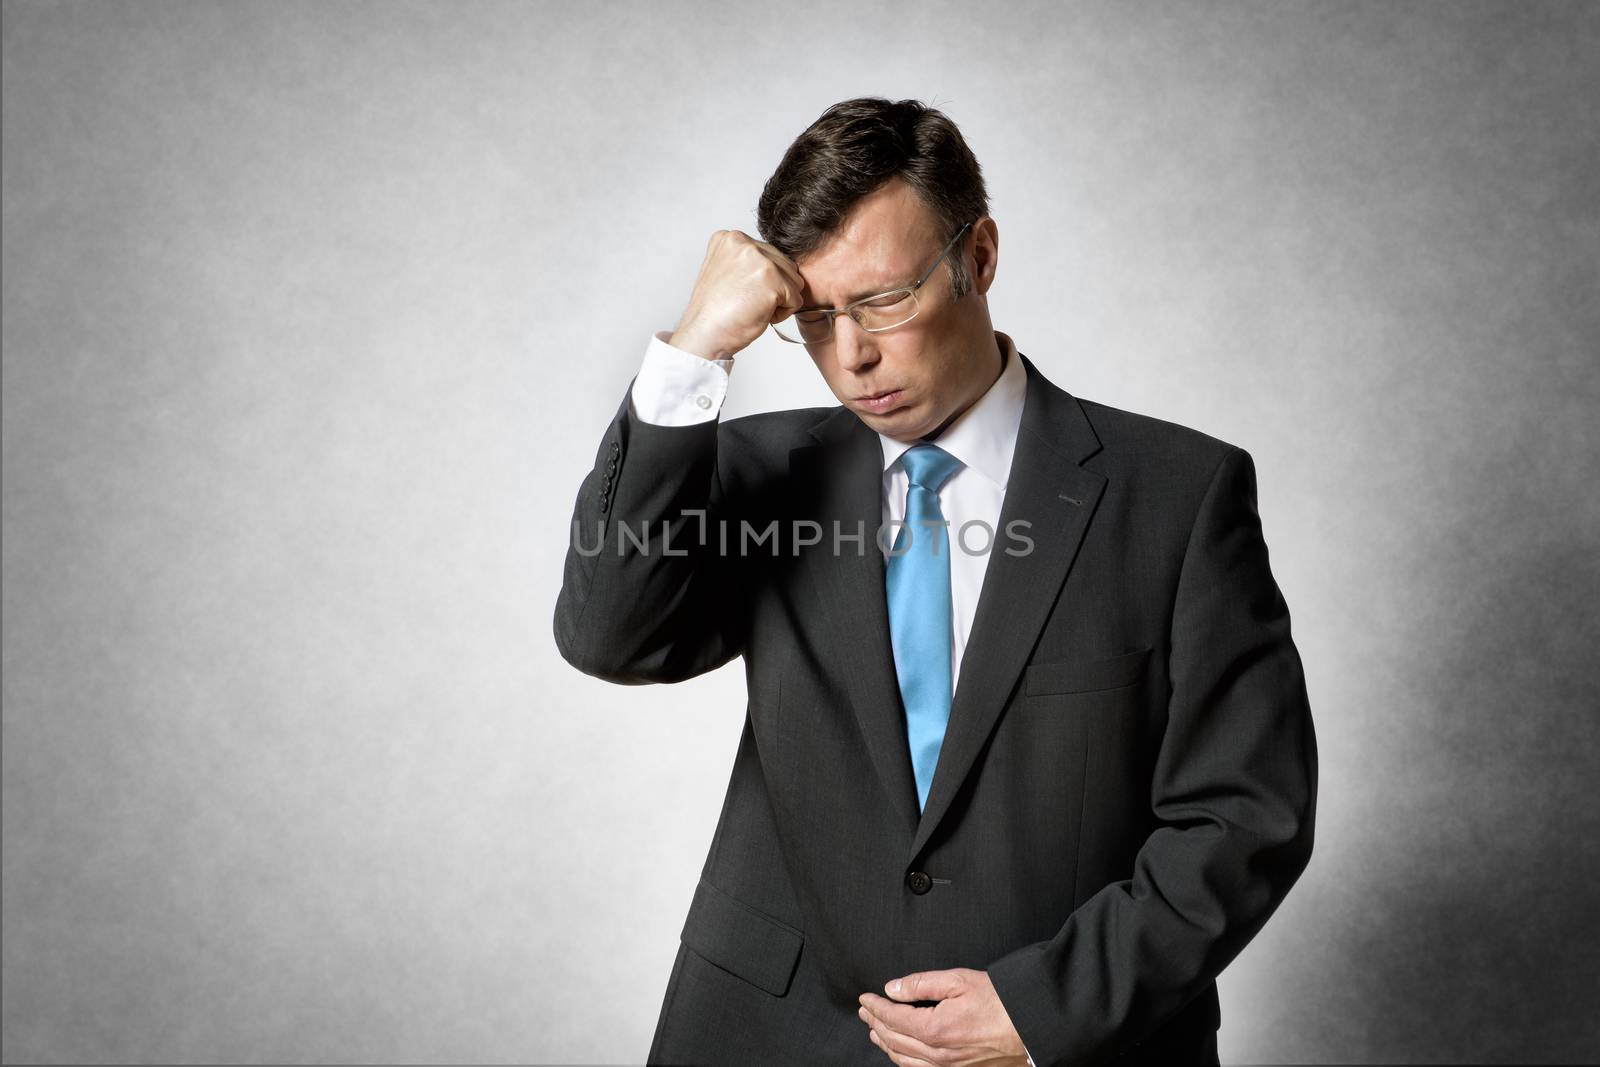 Image of a thinking and concentrated business man in dark suit